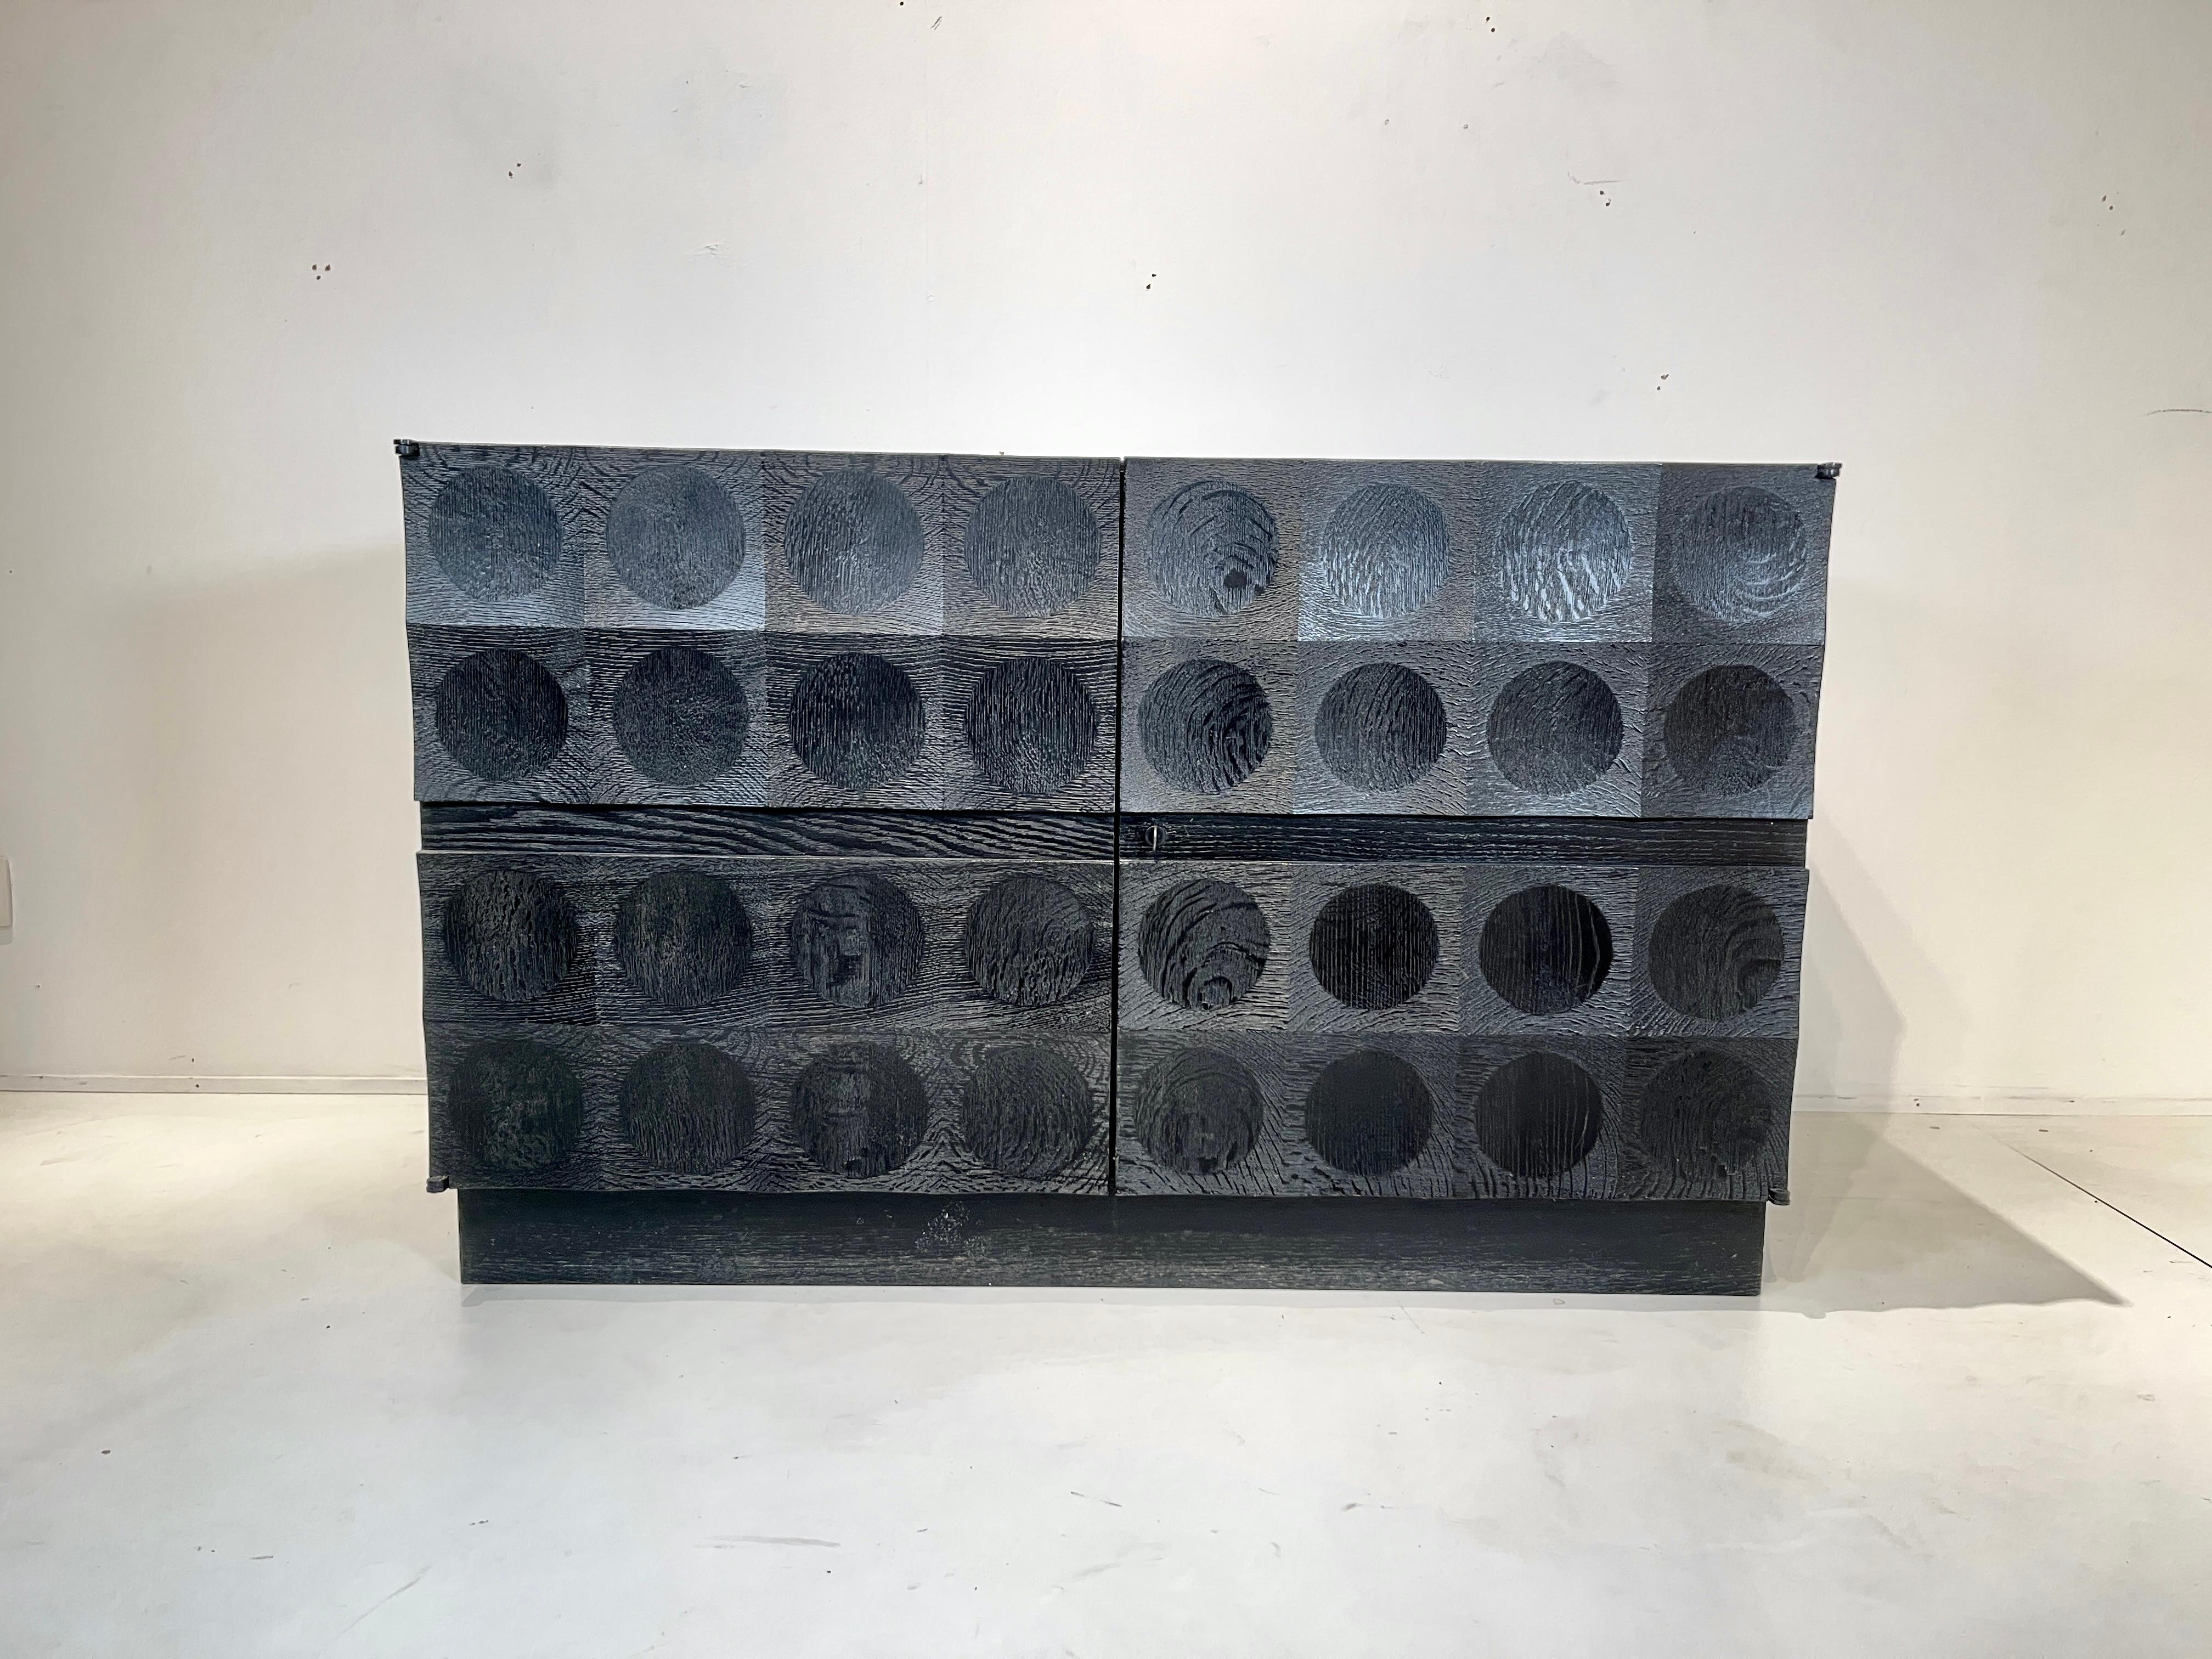 De Coene black oak painted cabinet, made in Belgium in the 1970s. Brutalist small sideboards included bar. More famous are his similar designs with a diamond pattern or a wavy pattern. Included key and in excellent original condition.